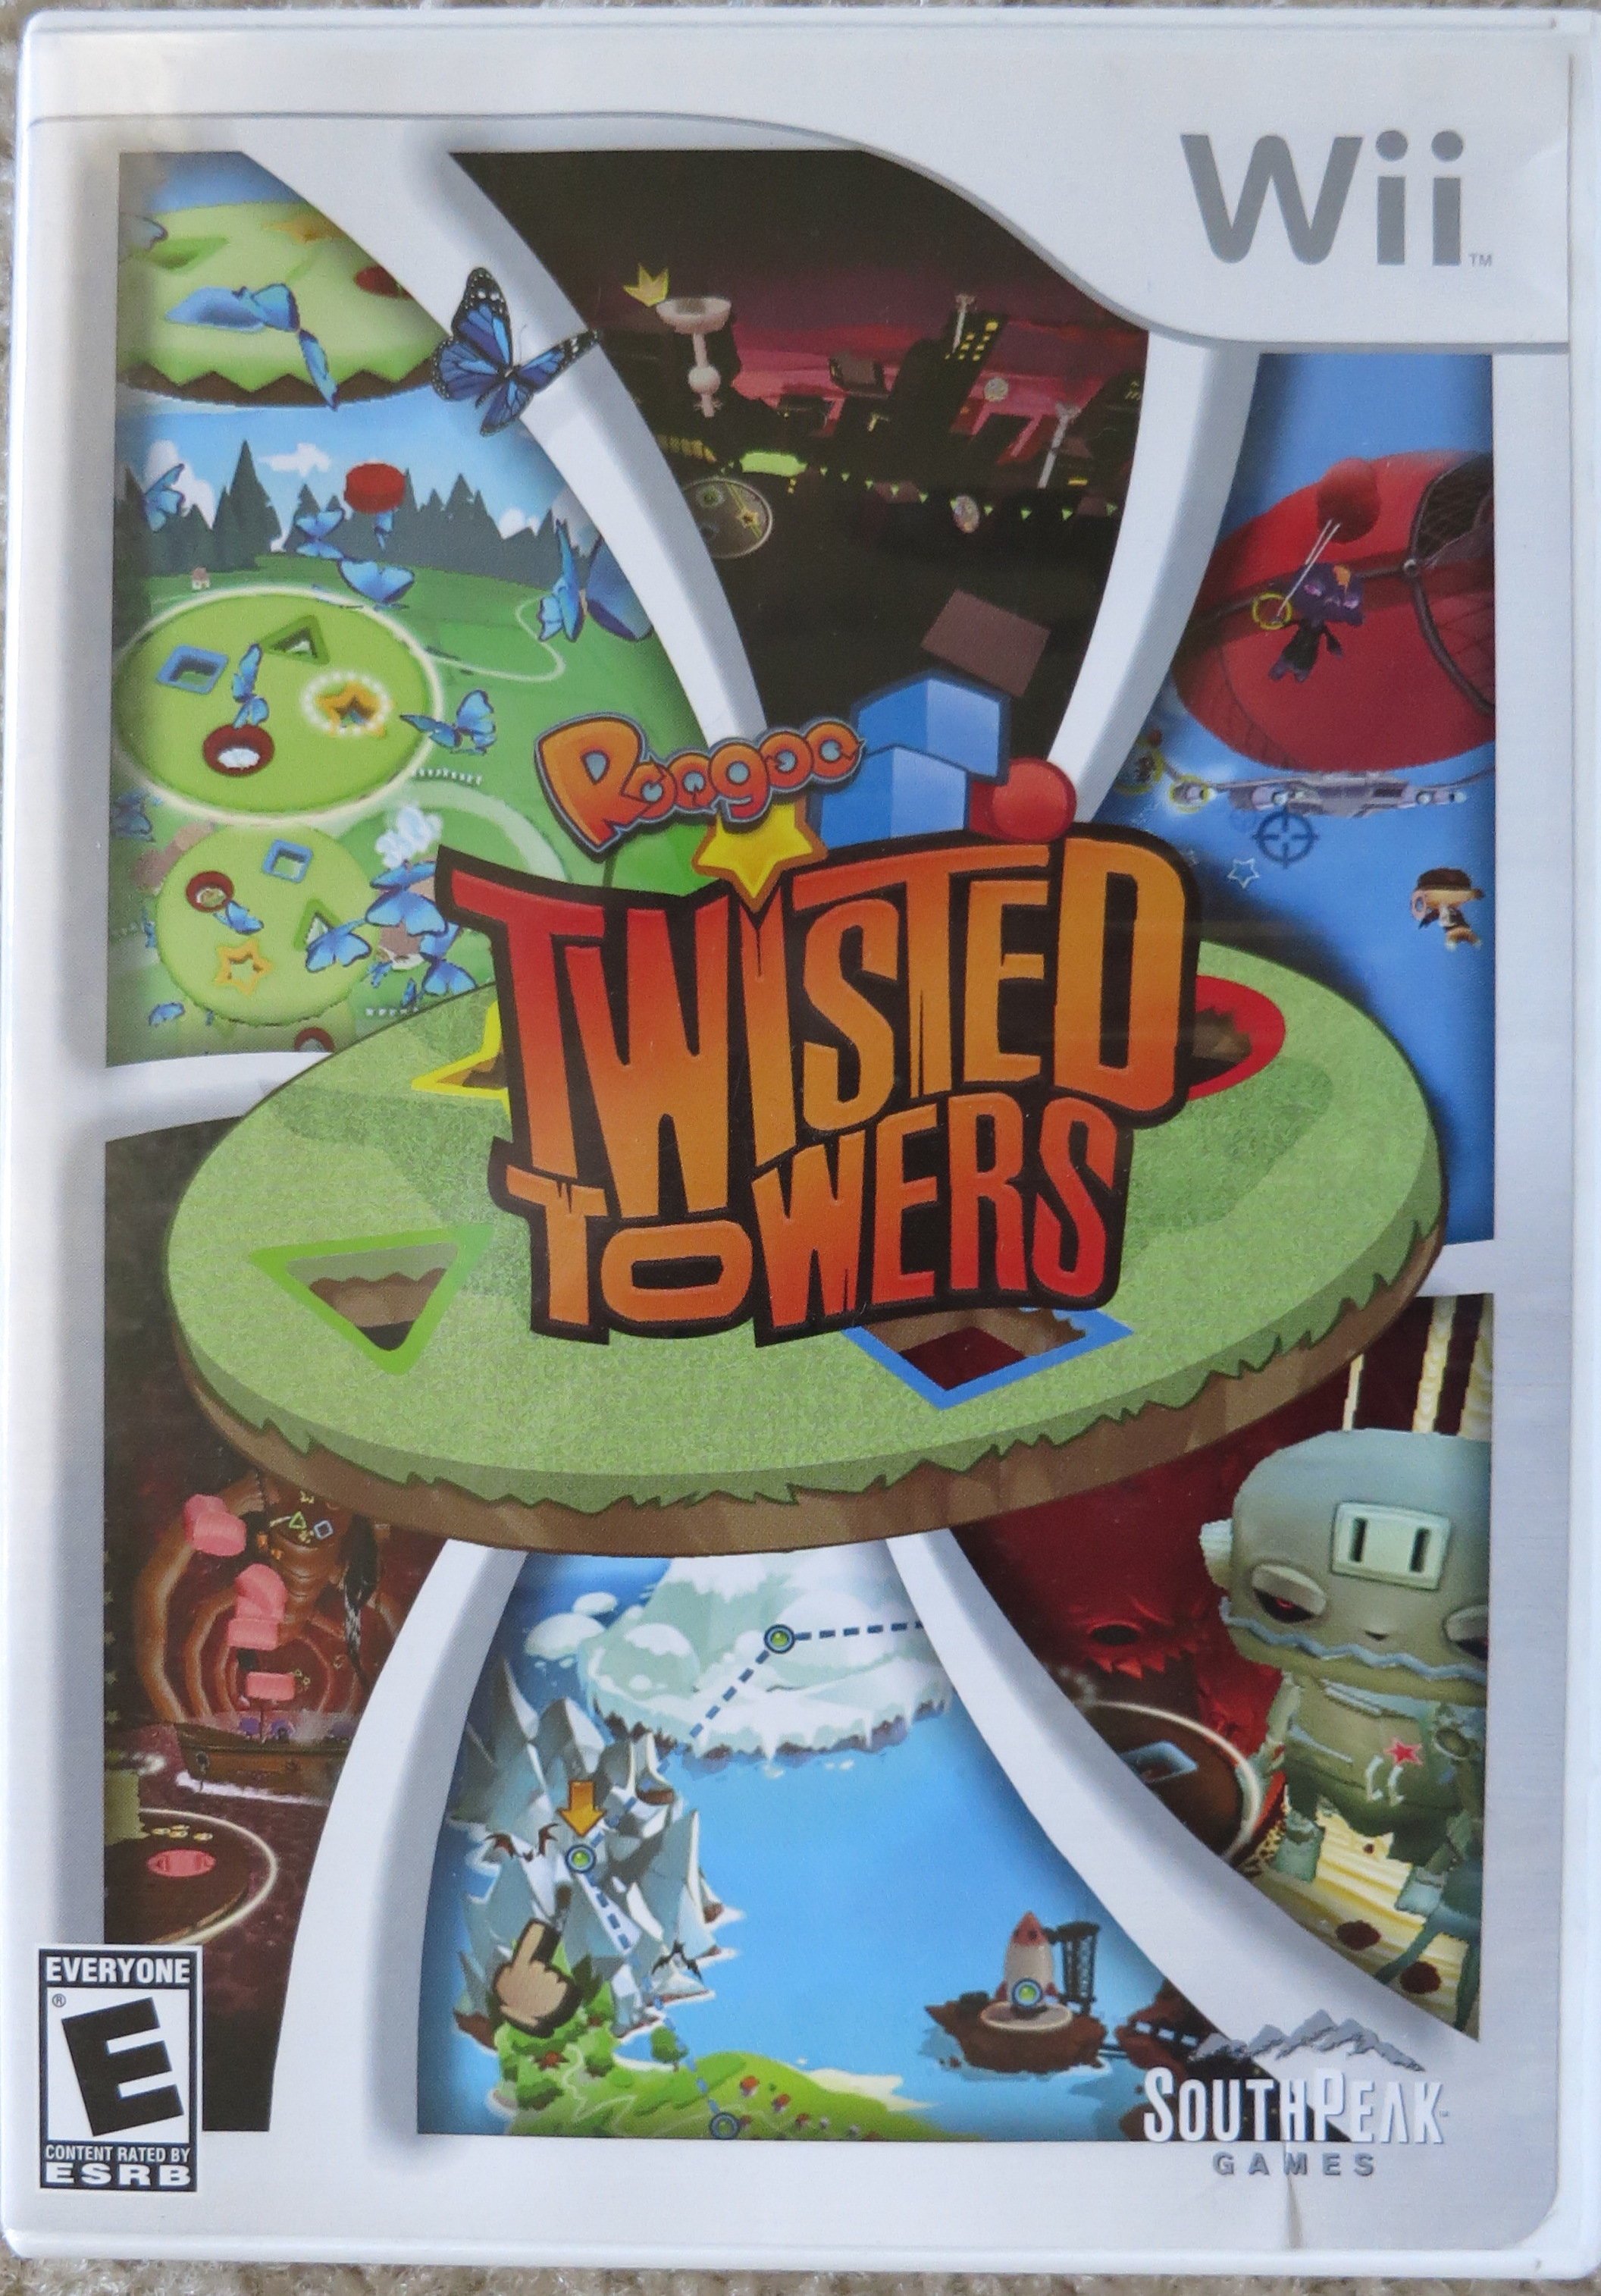 Roogoo Twisted Towers Cover